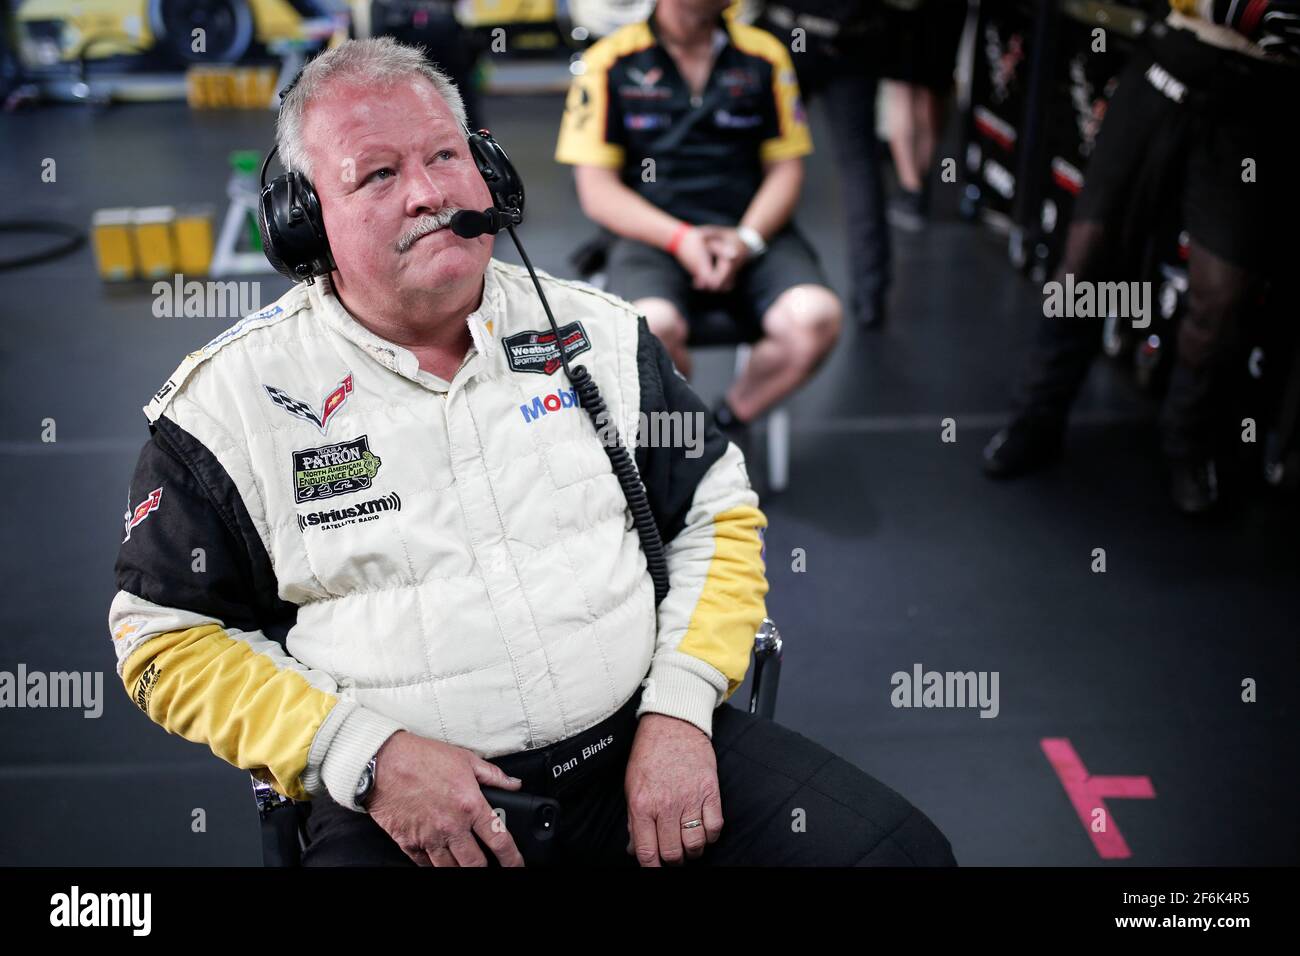 BINKS Dan, Chevrolet Corvette engineer, portrait during the 2017 Le Mans 24  hours parade and race, from June 16 to 18 at Le Mans circuit, France -  Photo Jean Michel Le Meur / DPPI Stock Photo - Alamy